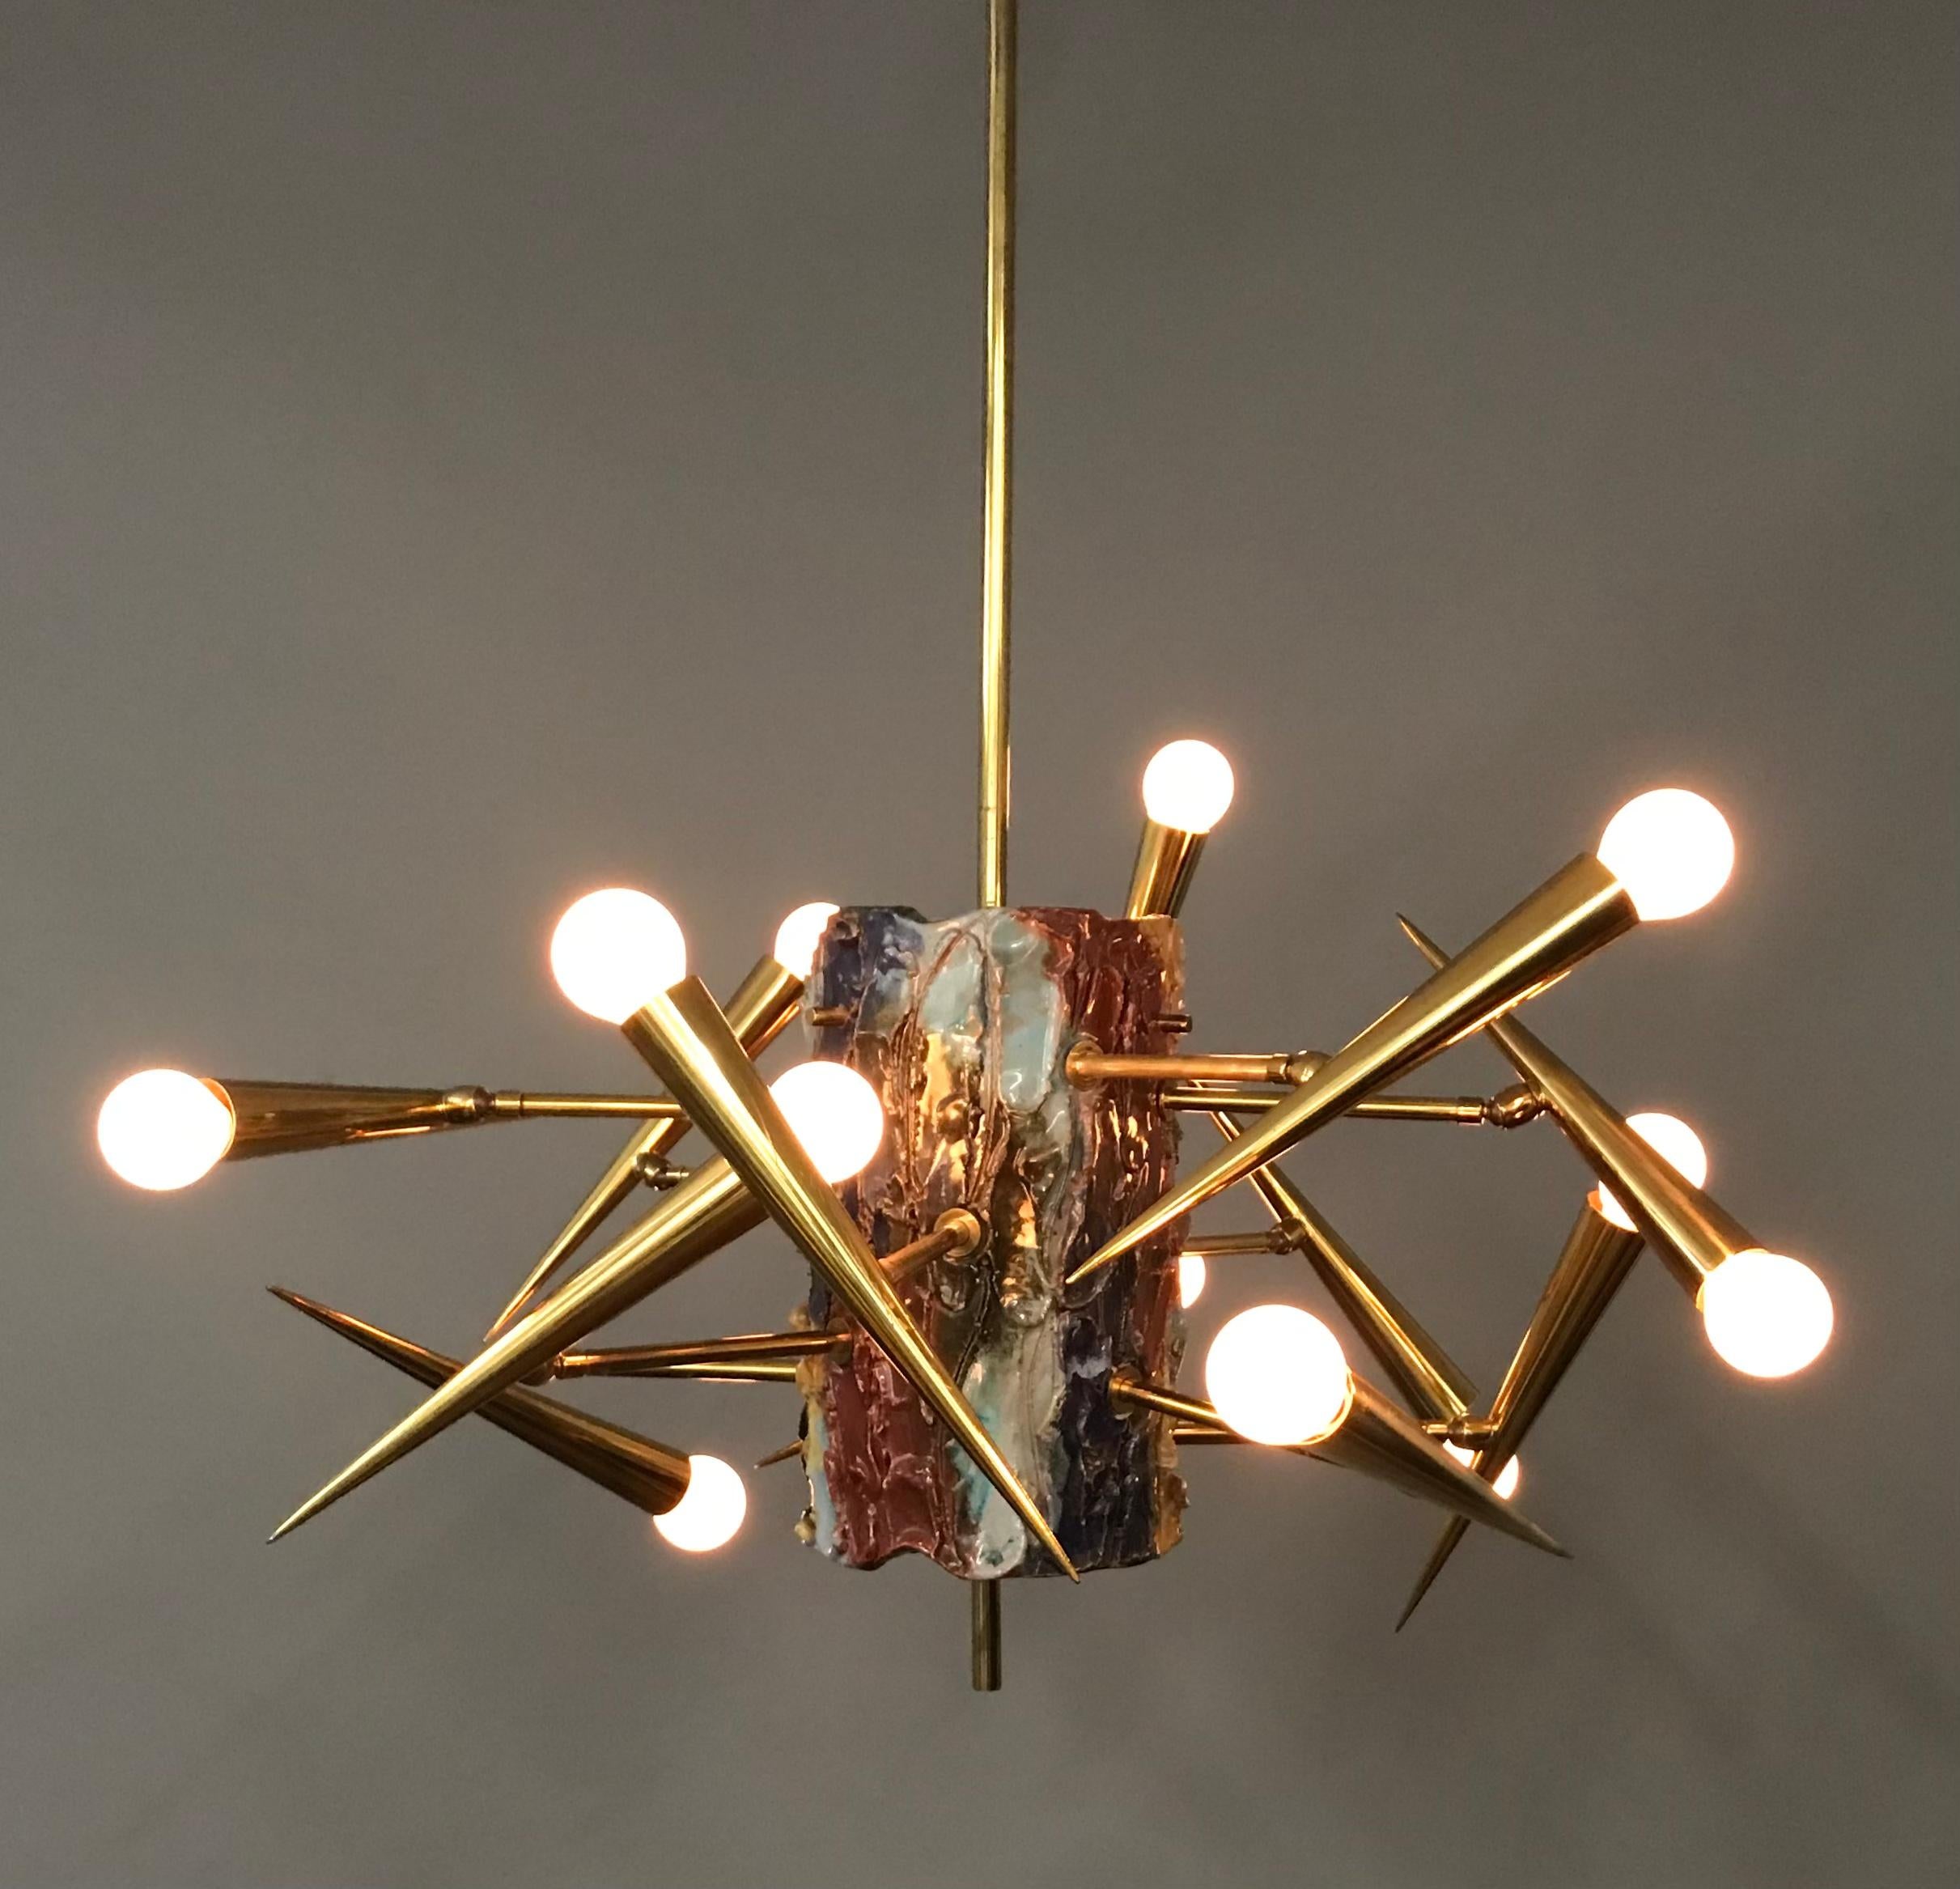 Leoncillo Leonardi's ceiling lamp in ceramic and brass with adjustable lights For Sale 6